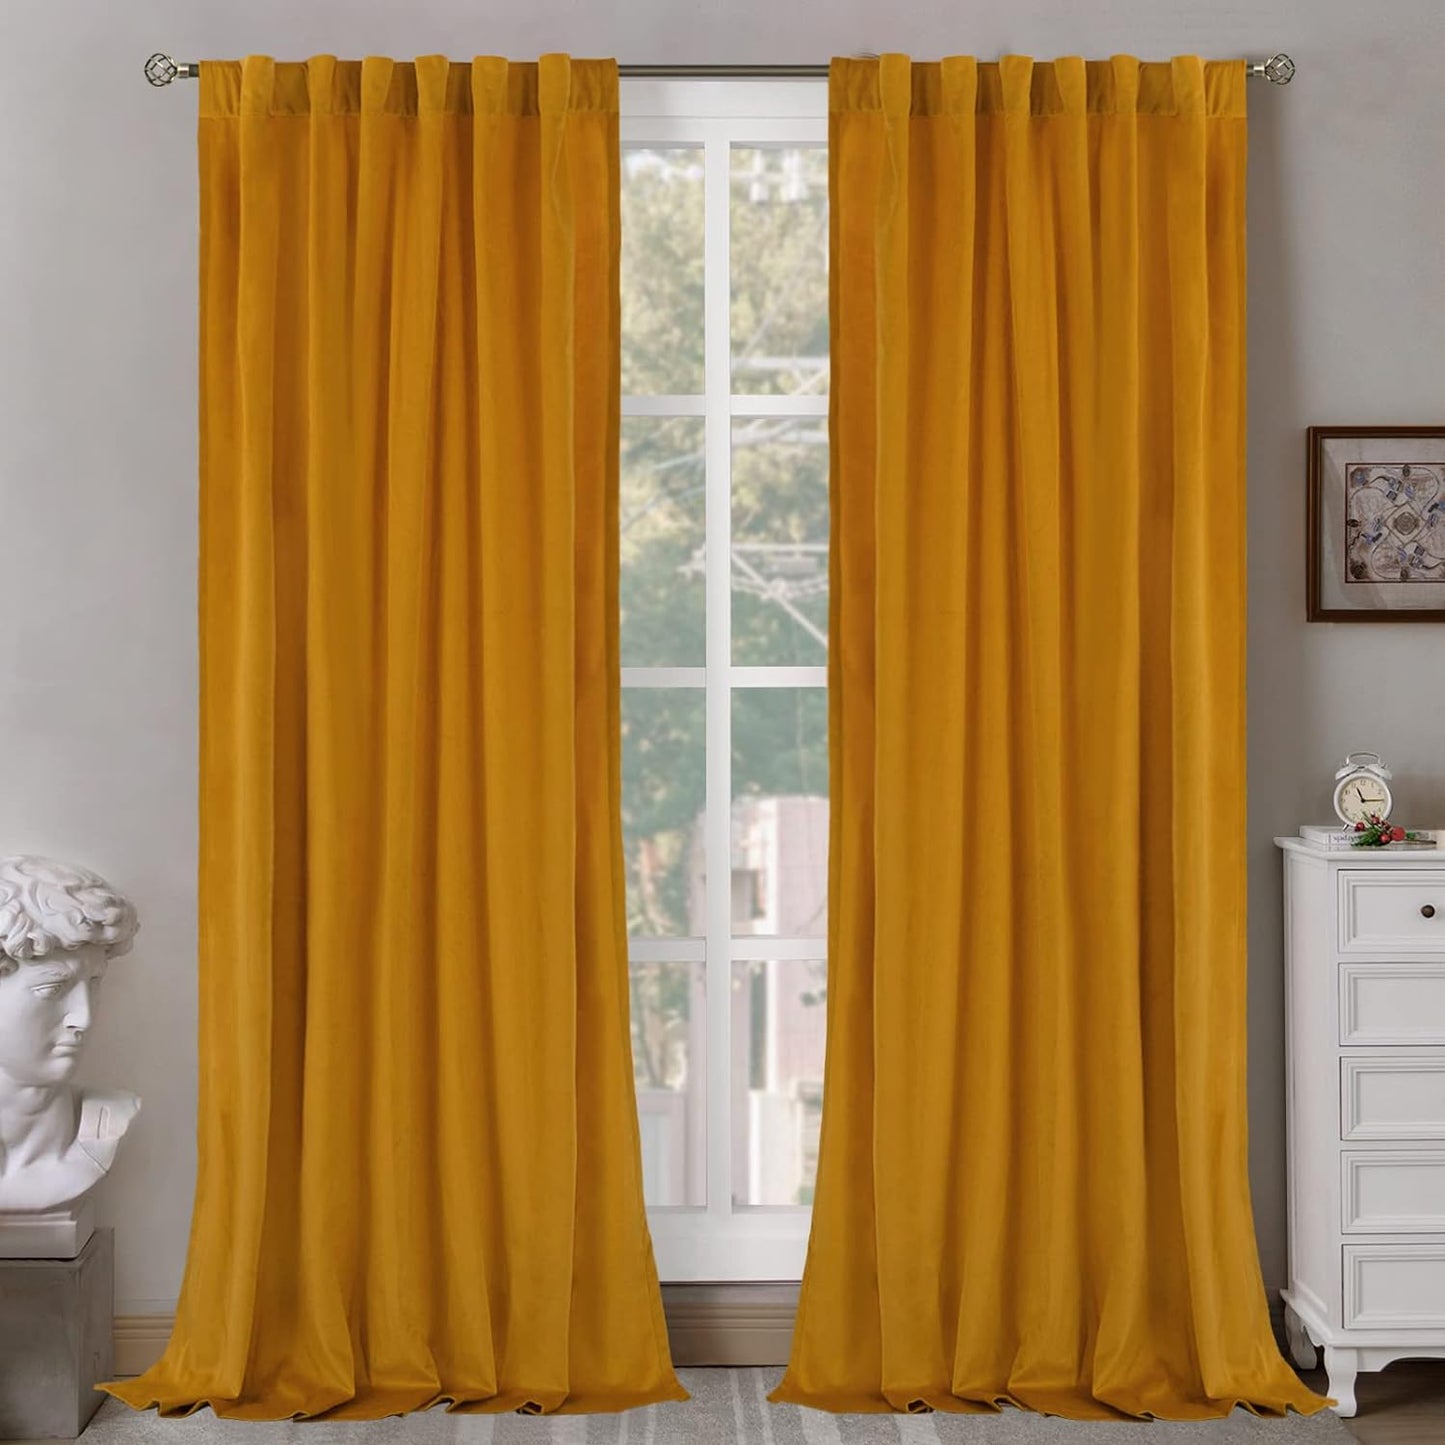 Bgment Grey Velvet Curtains 108 Inches Long for Living Room, Thermal Insulated Room Darkening Curtains Drapes Window Treatment with Back Tab and Rod Pocket, Set of 2 Panels, 52 X 108 Inch  BGment Gold 52W X 108L 